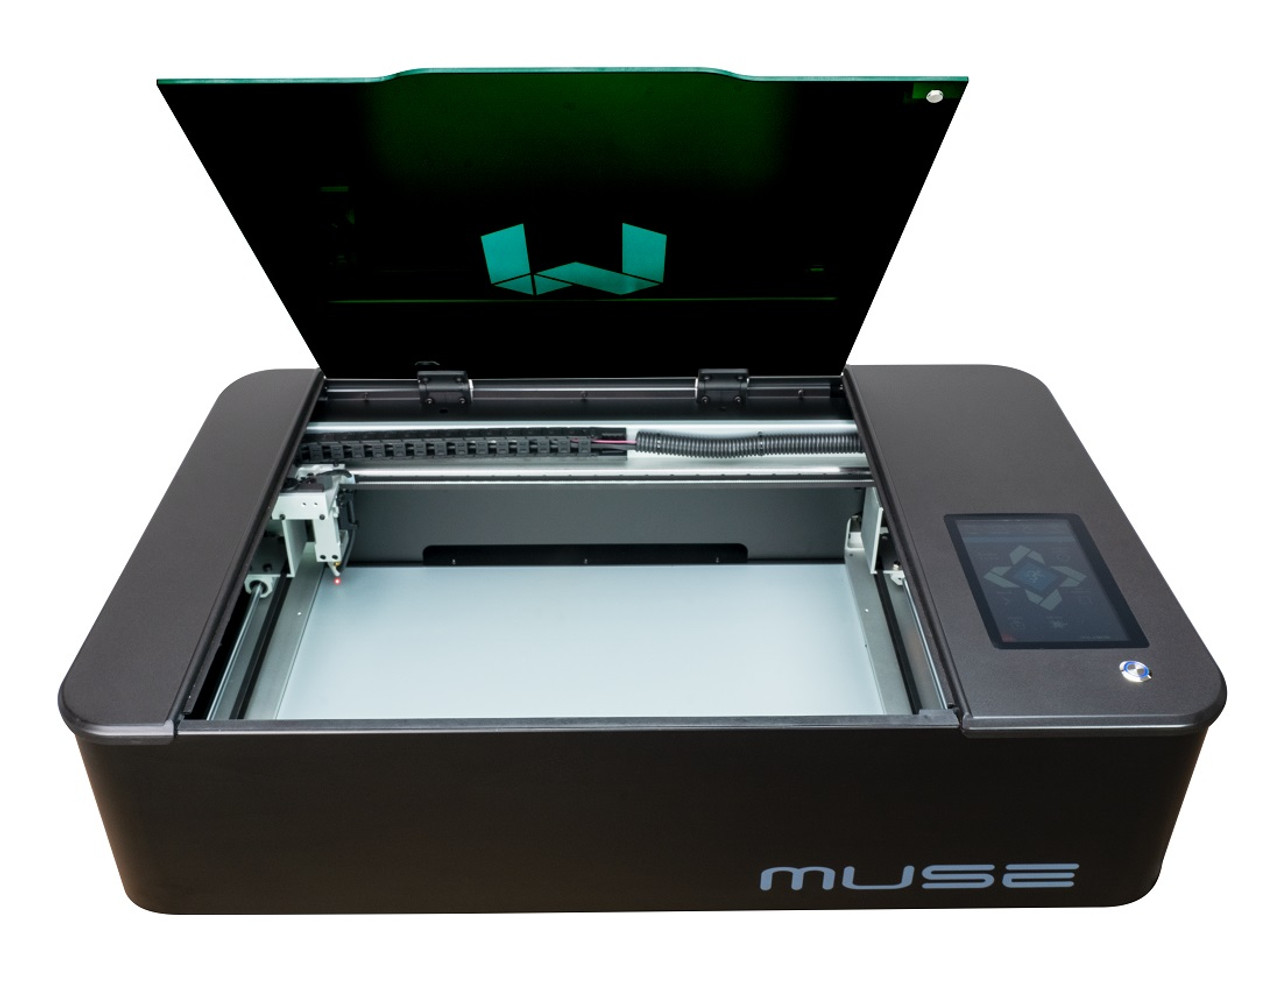 FSL Muse Core Desktop CO2 Laser Cutting and Engraving Machine